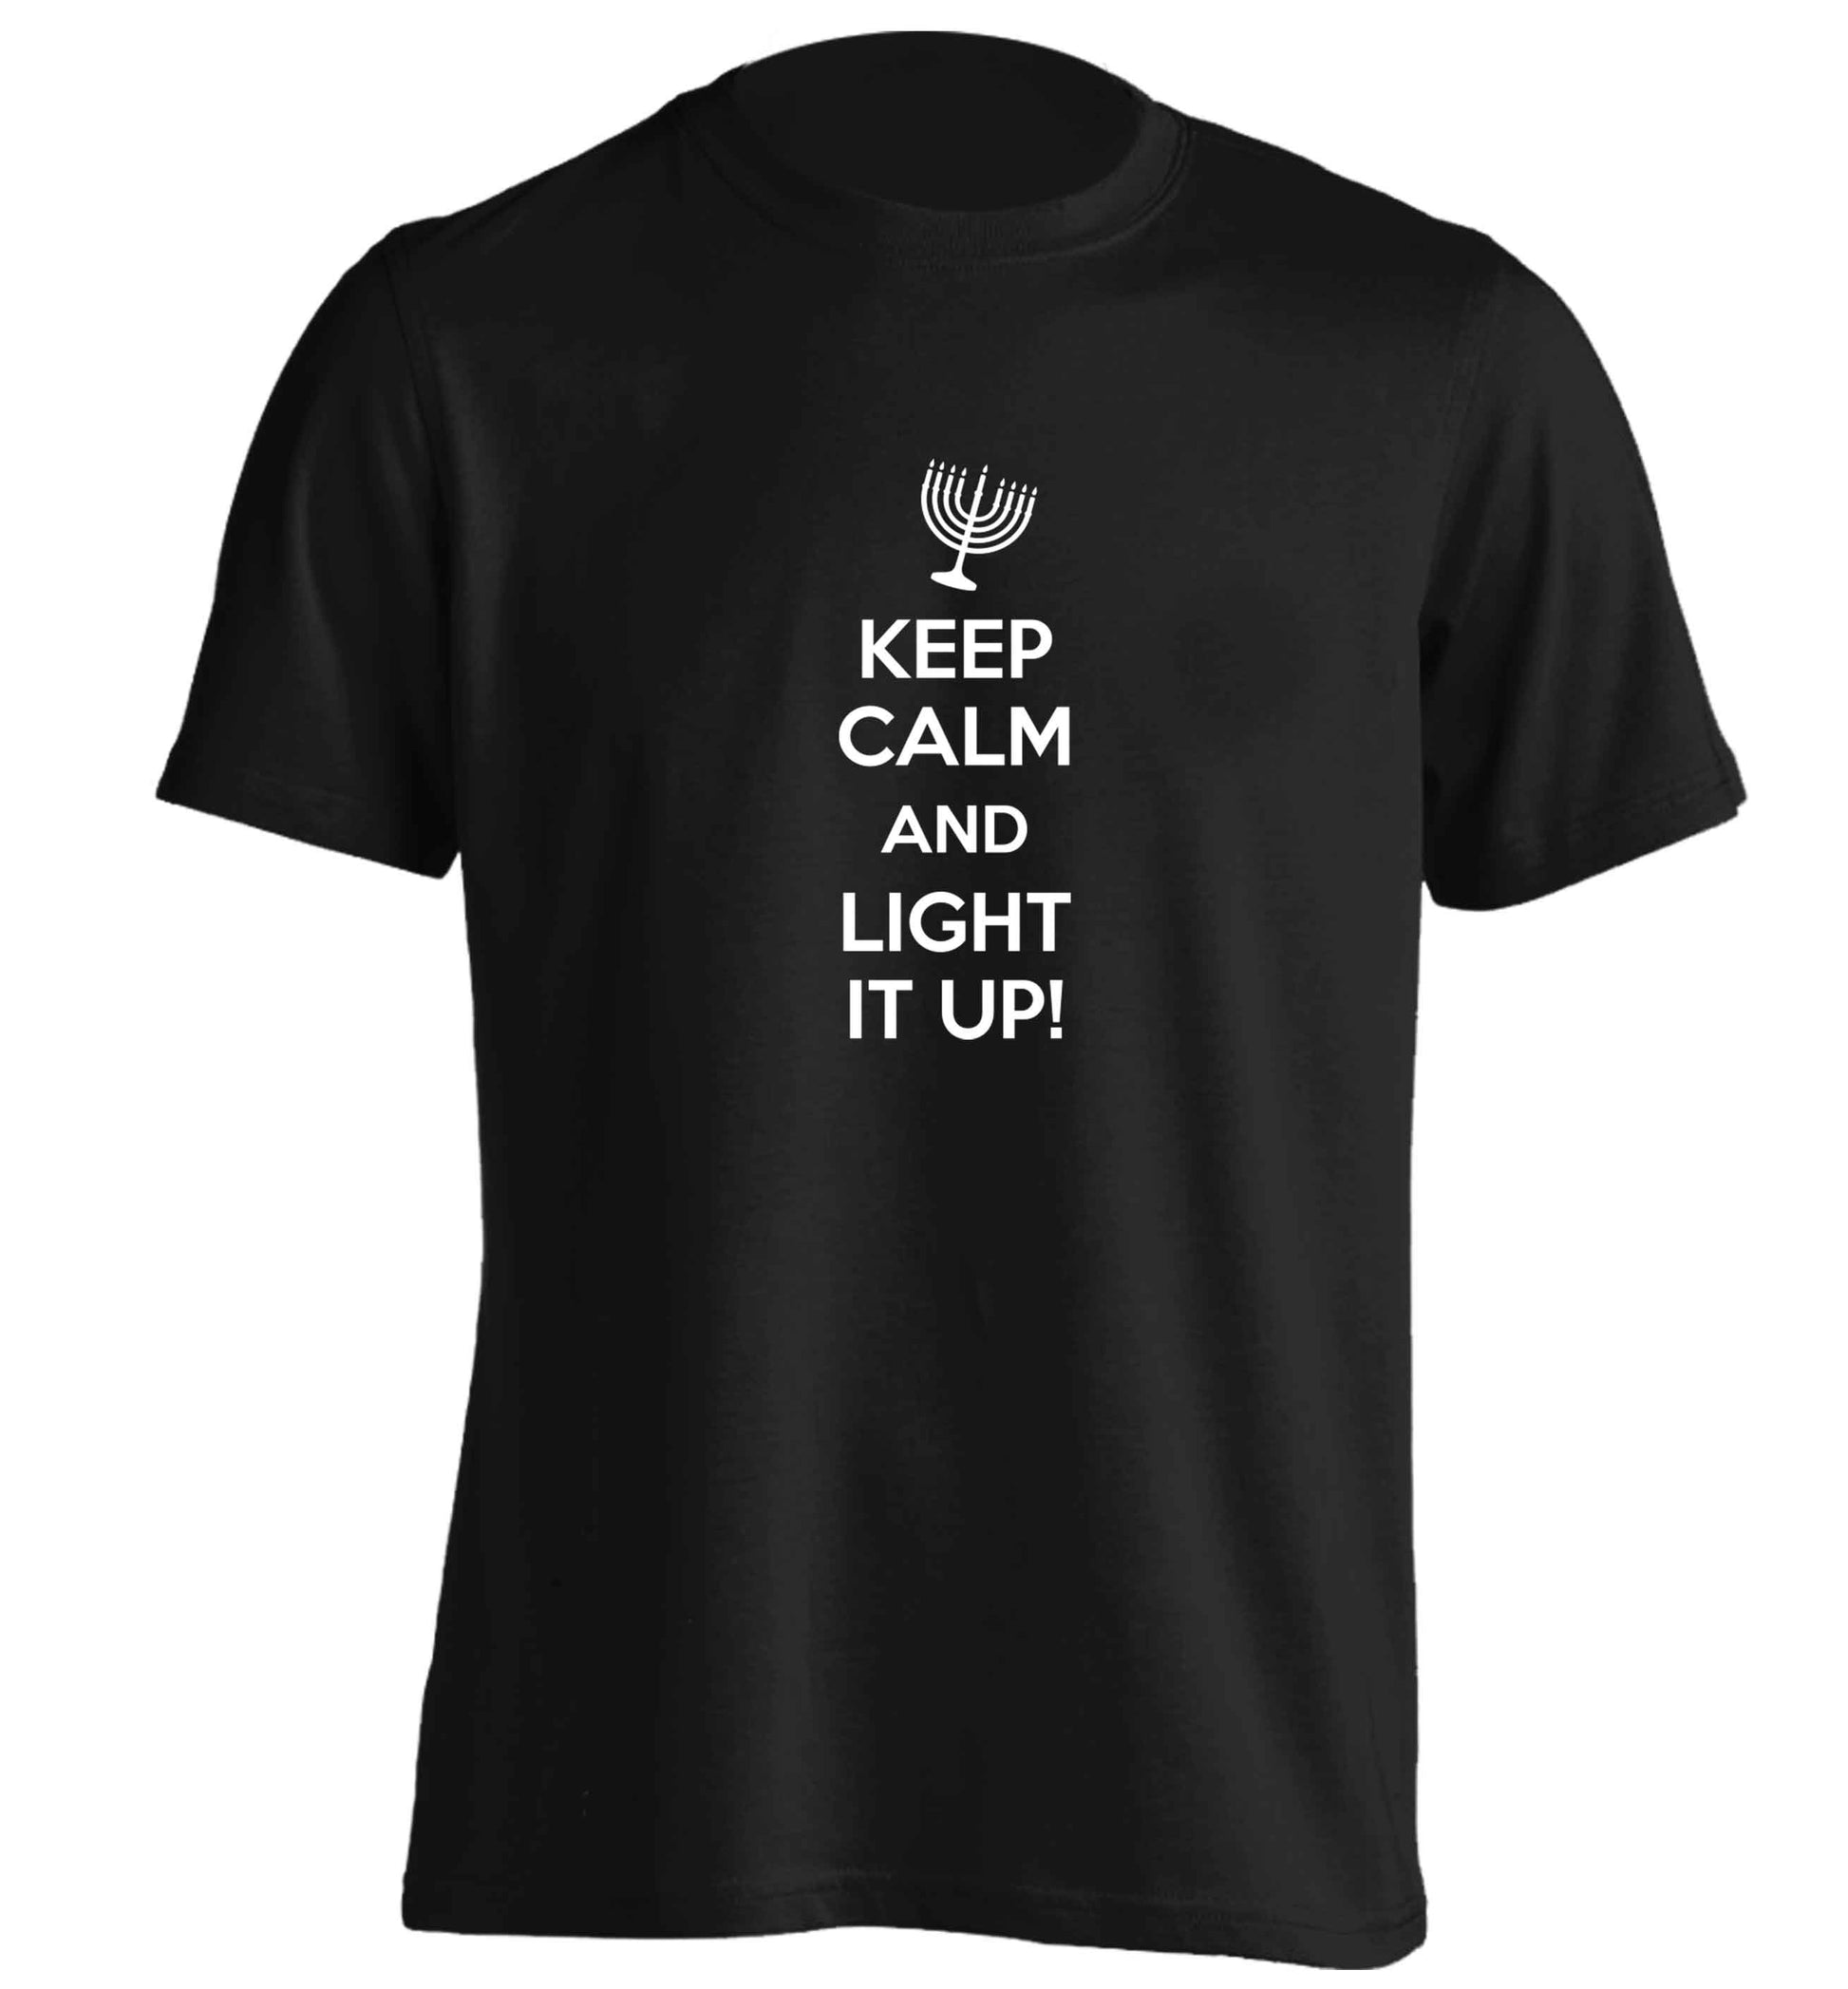 Keep calm and light it up adults unisex black Tshirt 2XL